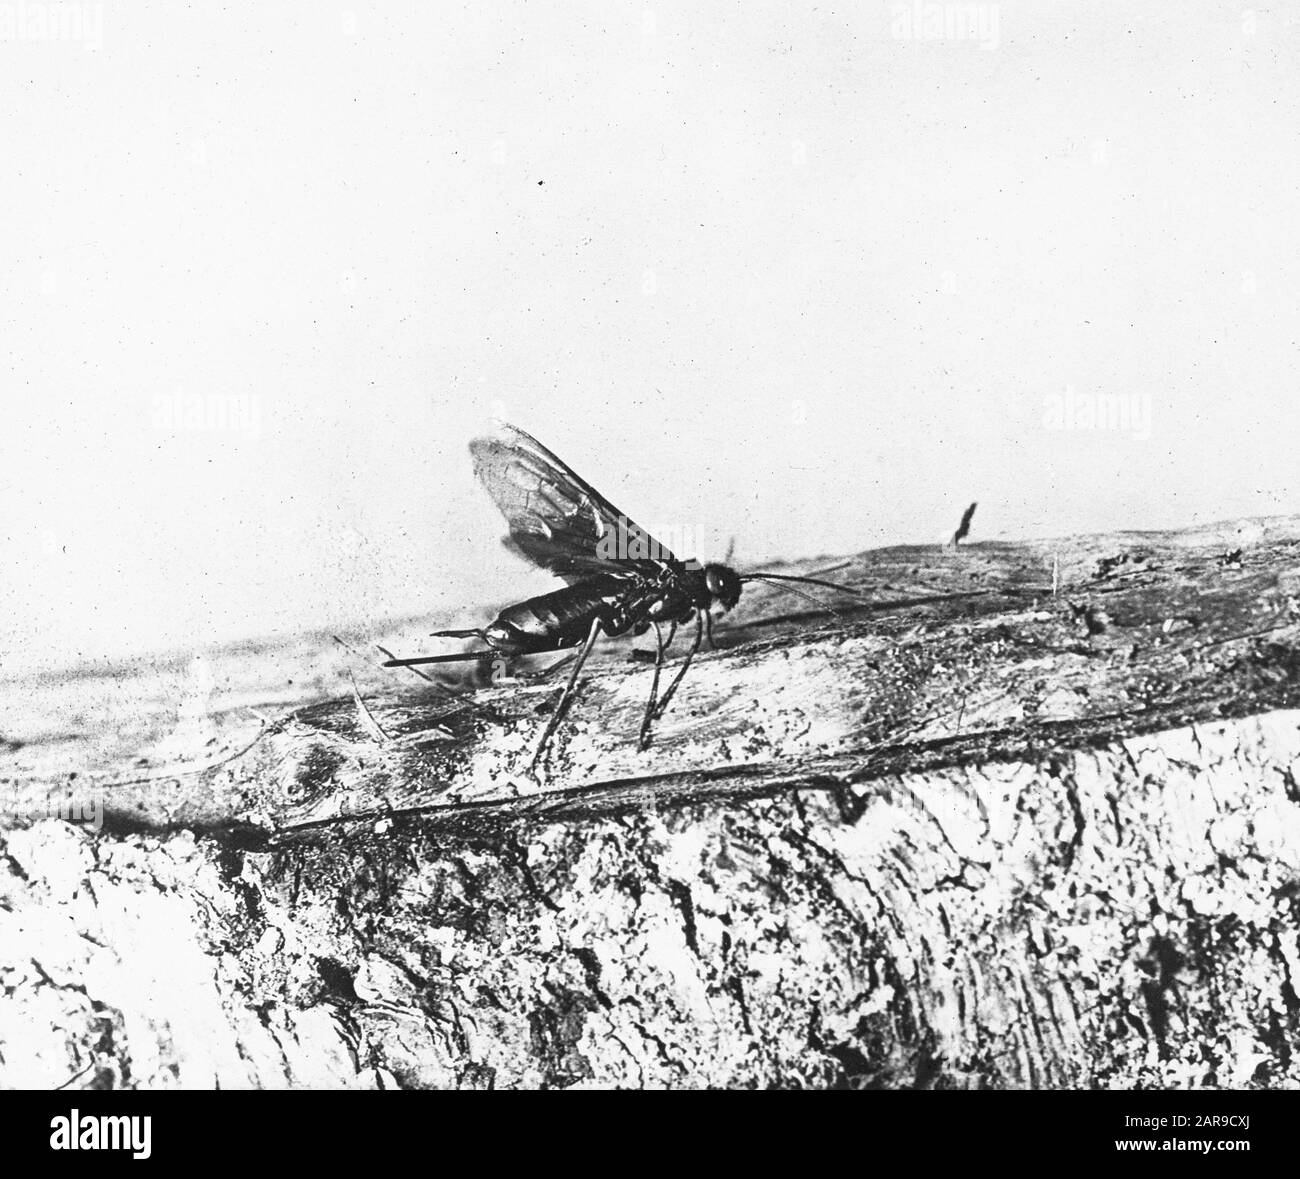 insects, damages, sirex gigas Date: undated Keywords: damages, insects Personal name: sirex gigas Stock Photo